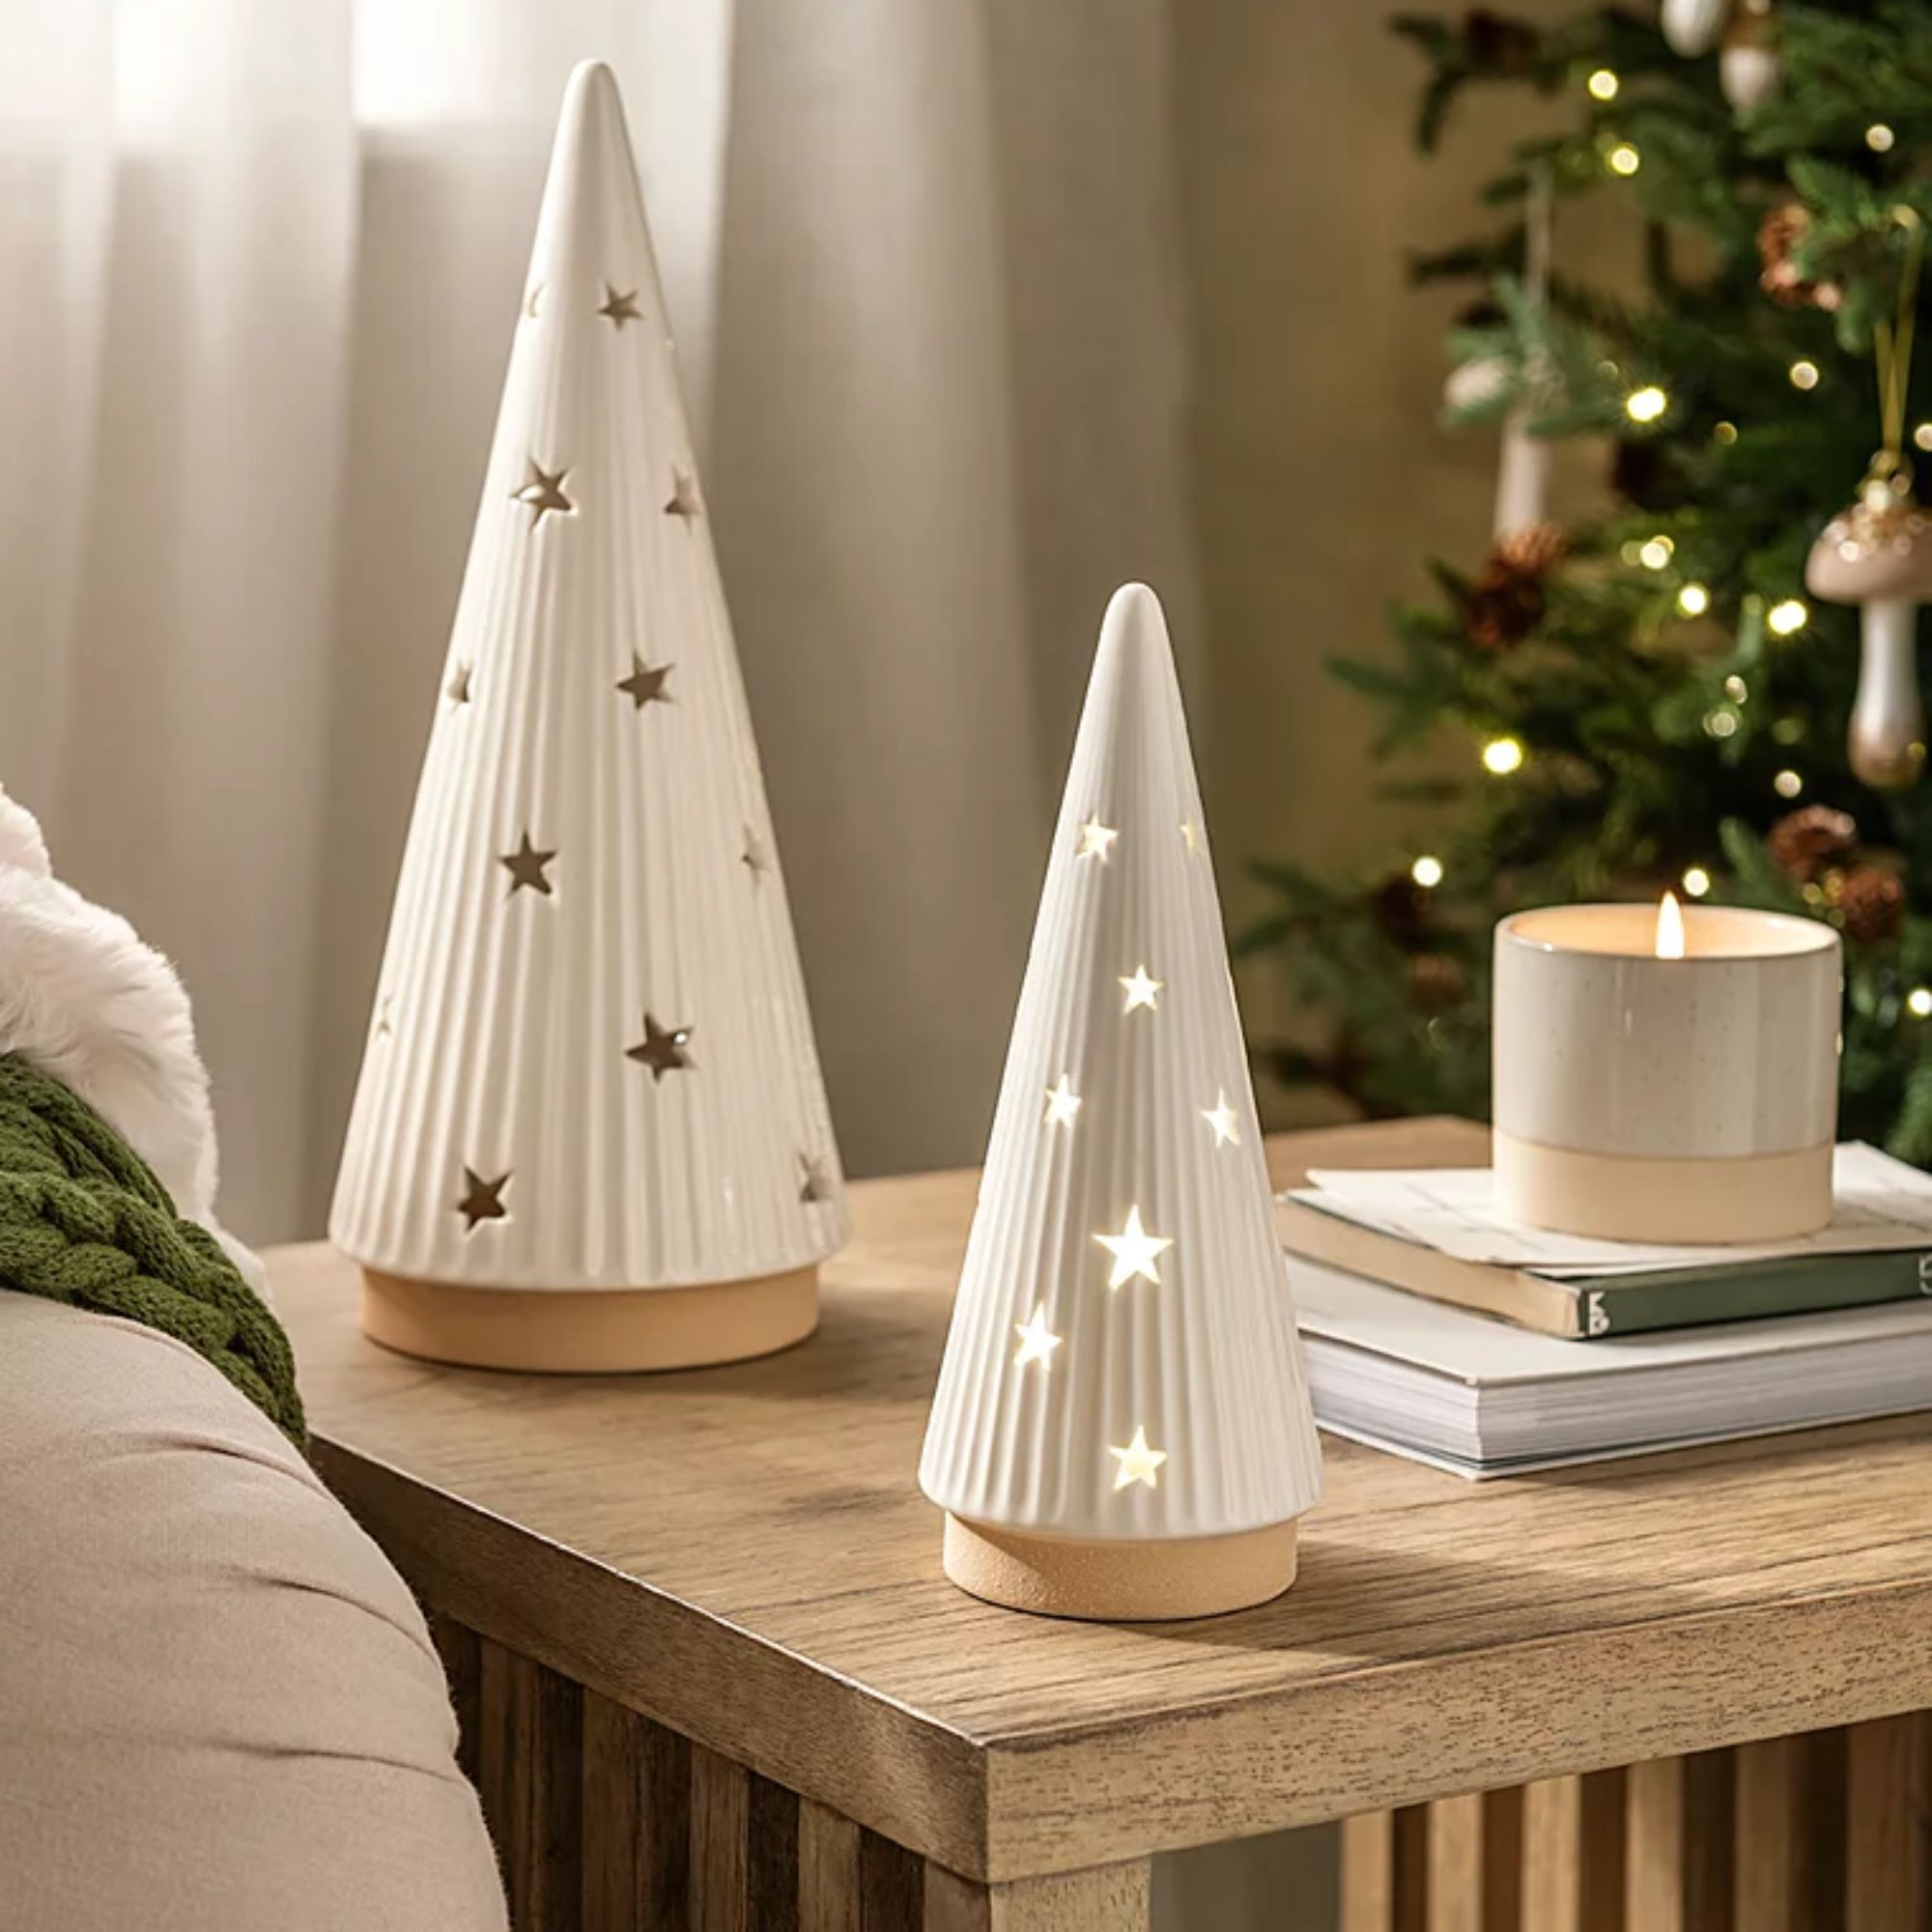 Experts love Mrs Hinch's neutral Christmas living room decor | Ideal Home